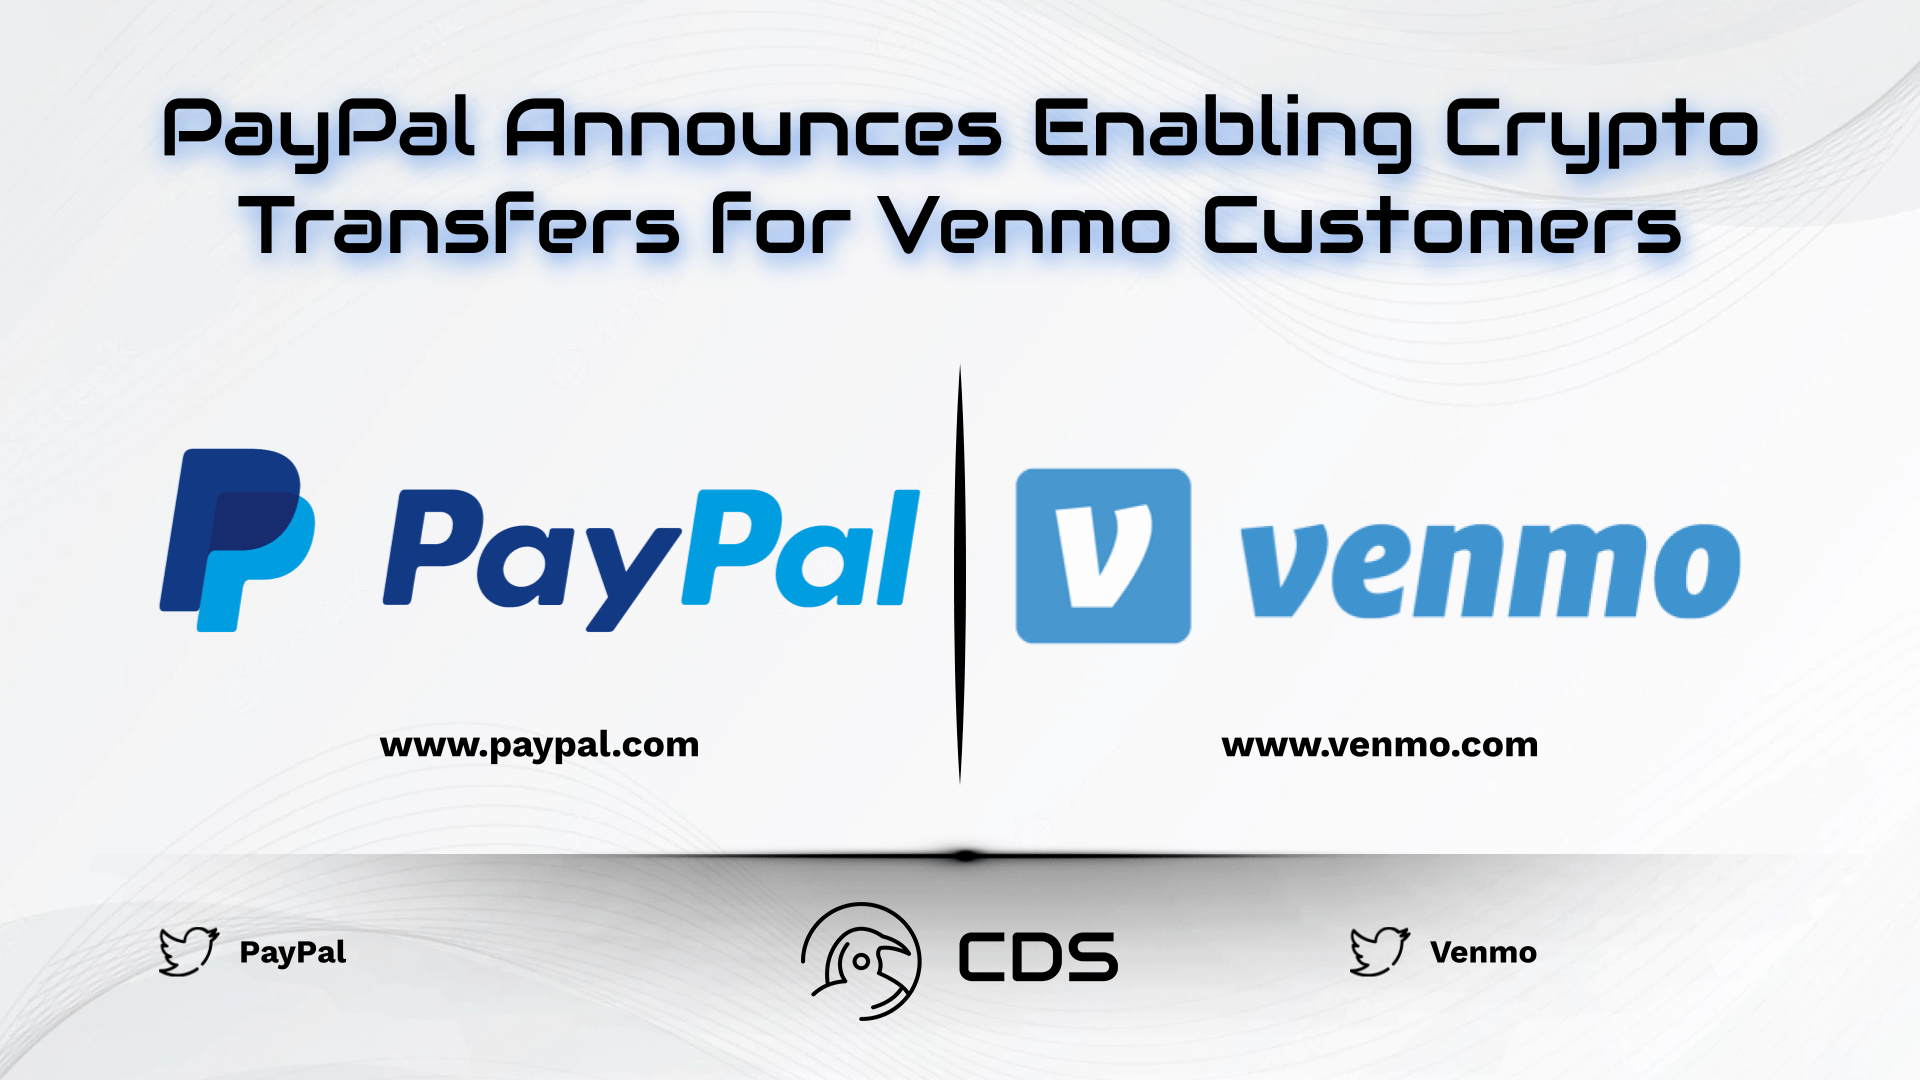 PayPal Announces Enabling Crypto Transfers for Venmo Customers